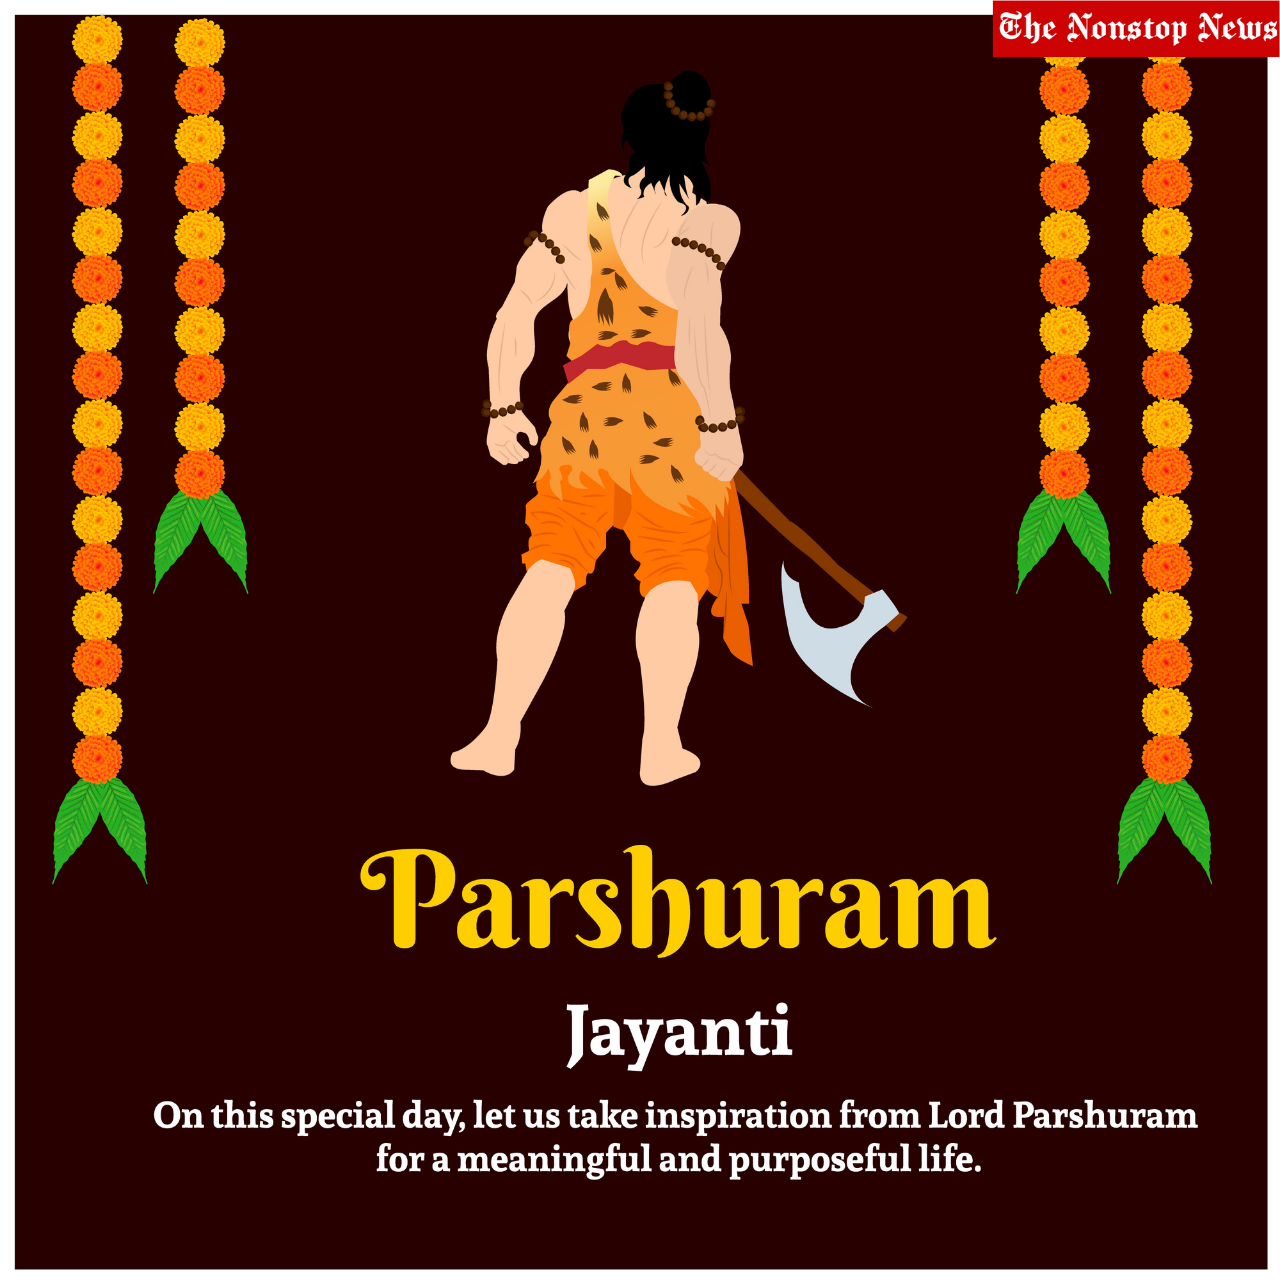 Happy Parshuram Jayanti 2022: Best Wishes, Quotes, Banners, Messages, HD Images, And WhatsApp Status Video to Download